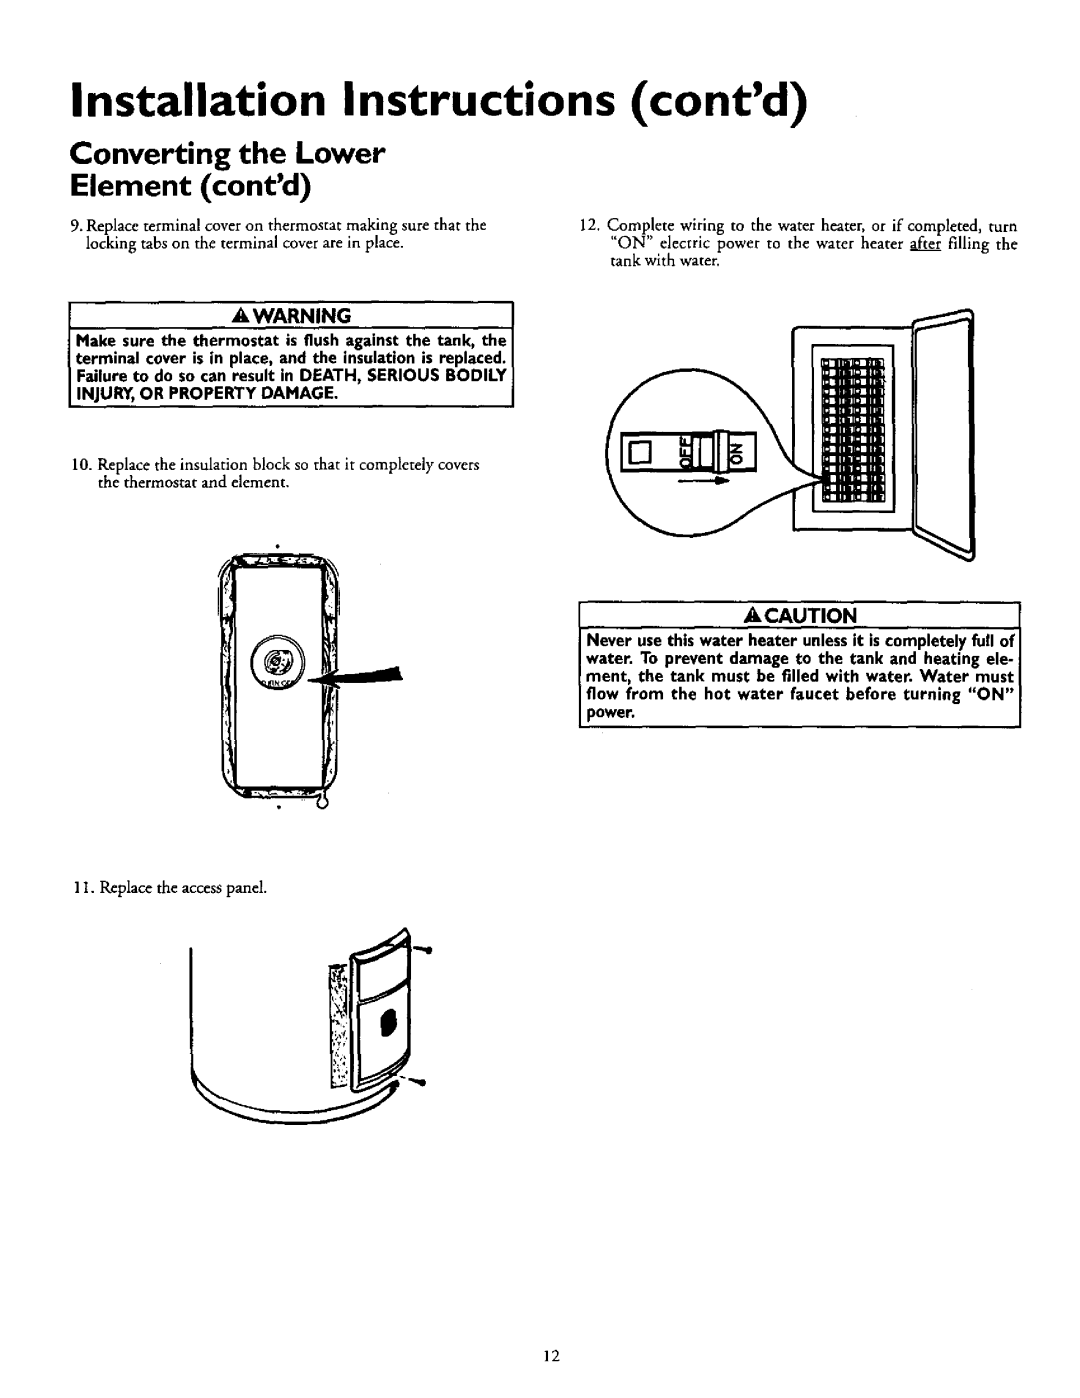 Kenmore 153.327864, 153.327664, 153.327264, 153.327463 Installation Instructions contd, Converting the Lower Element contd 